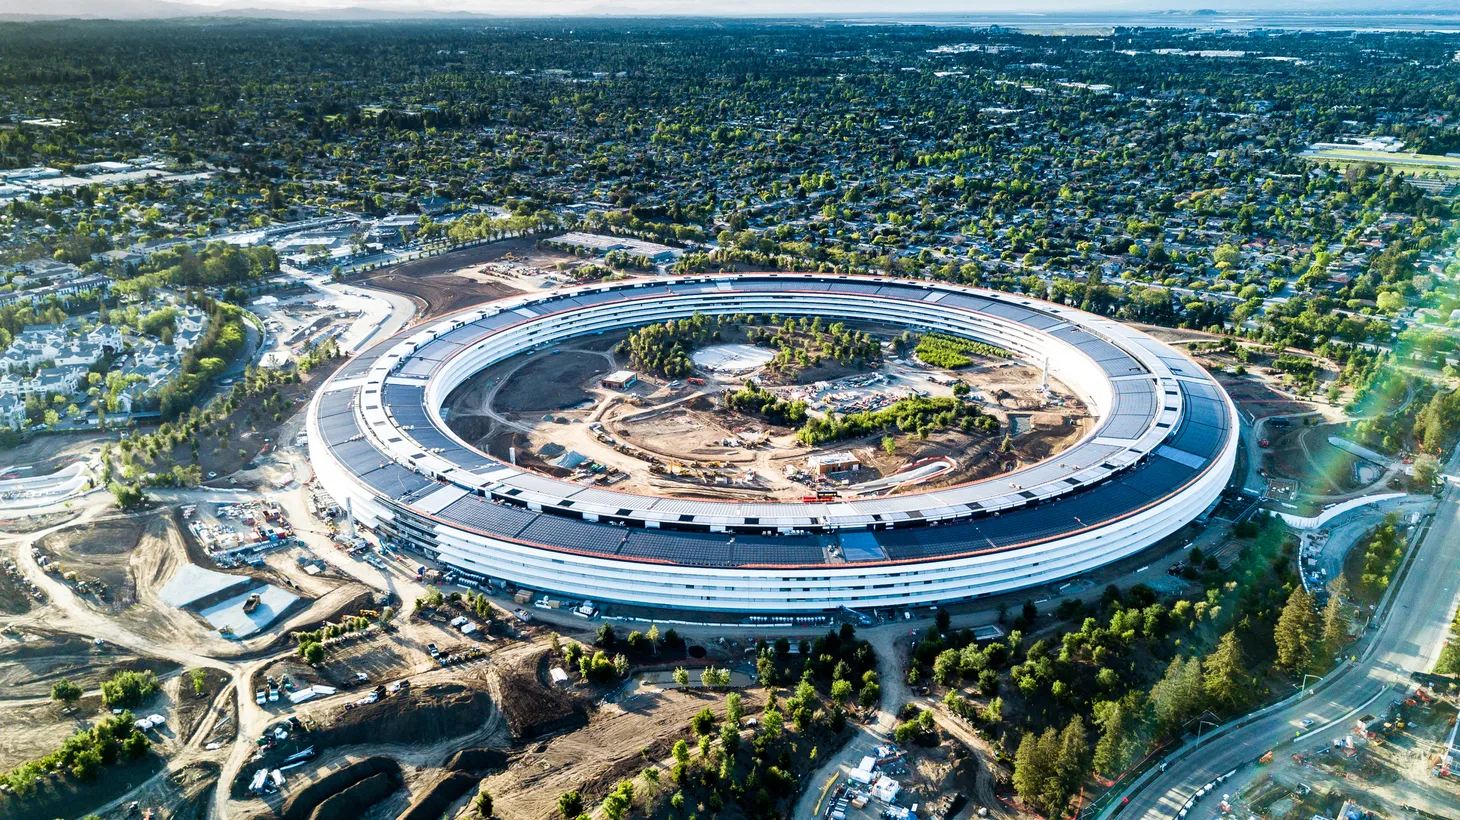 Apple’s futuristic headquarters in Cupertino is one example of the massive wealth generated in Silicon Valley, but tougher times could be coming for Big Tech.